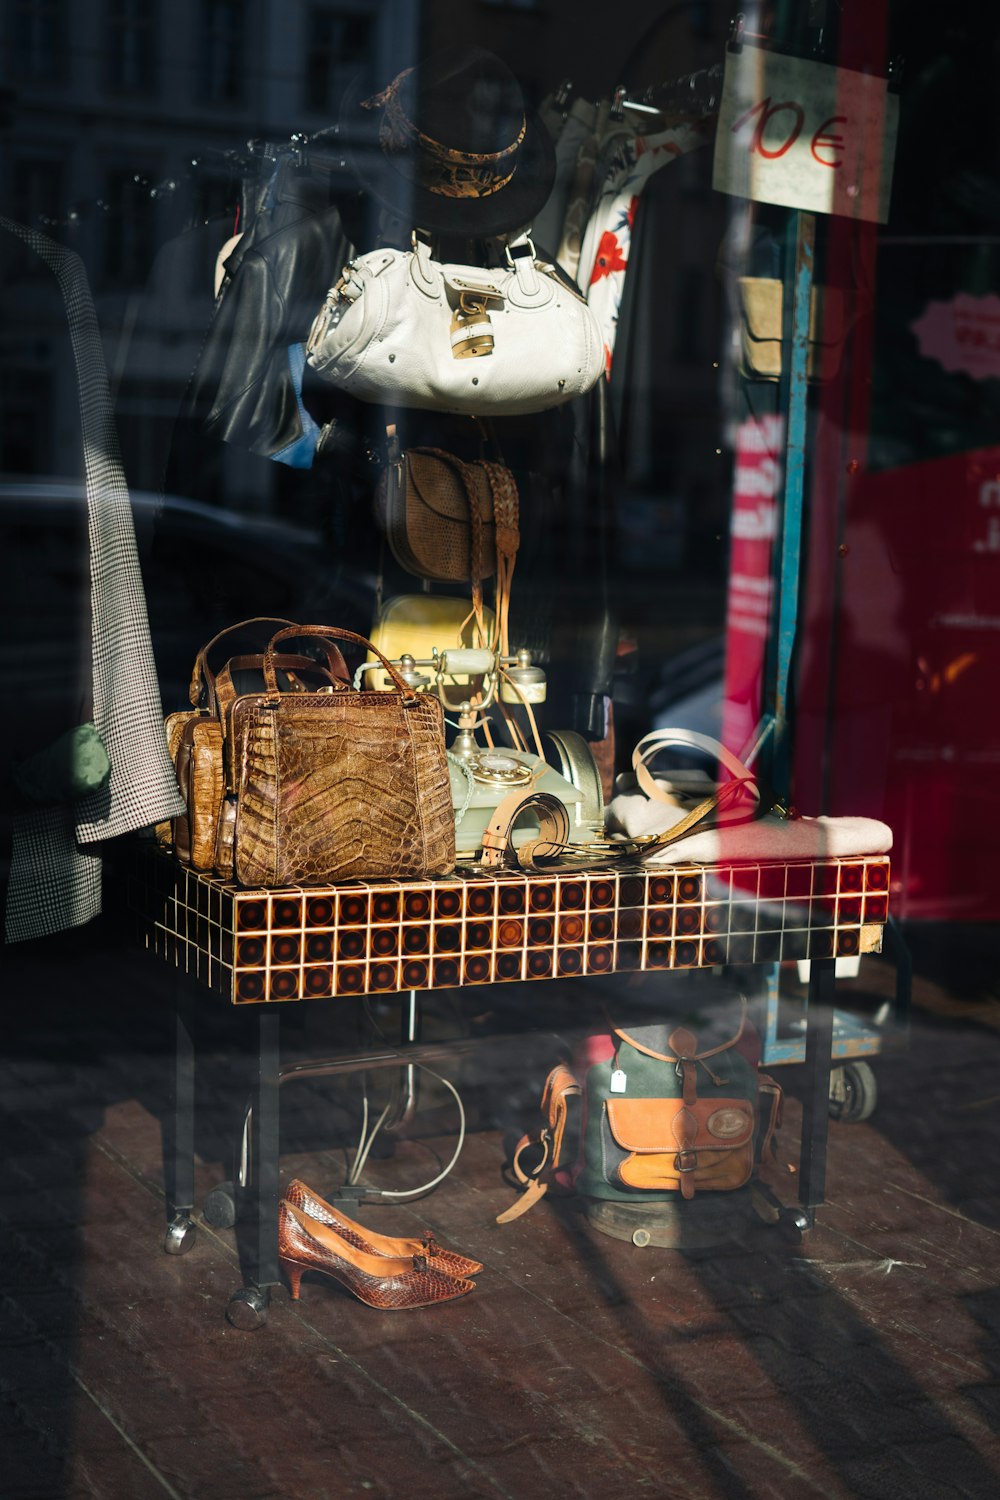 a display of shoes and purses in a store window